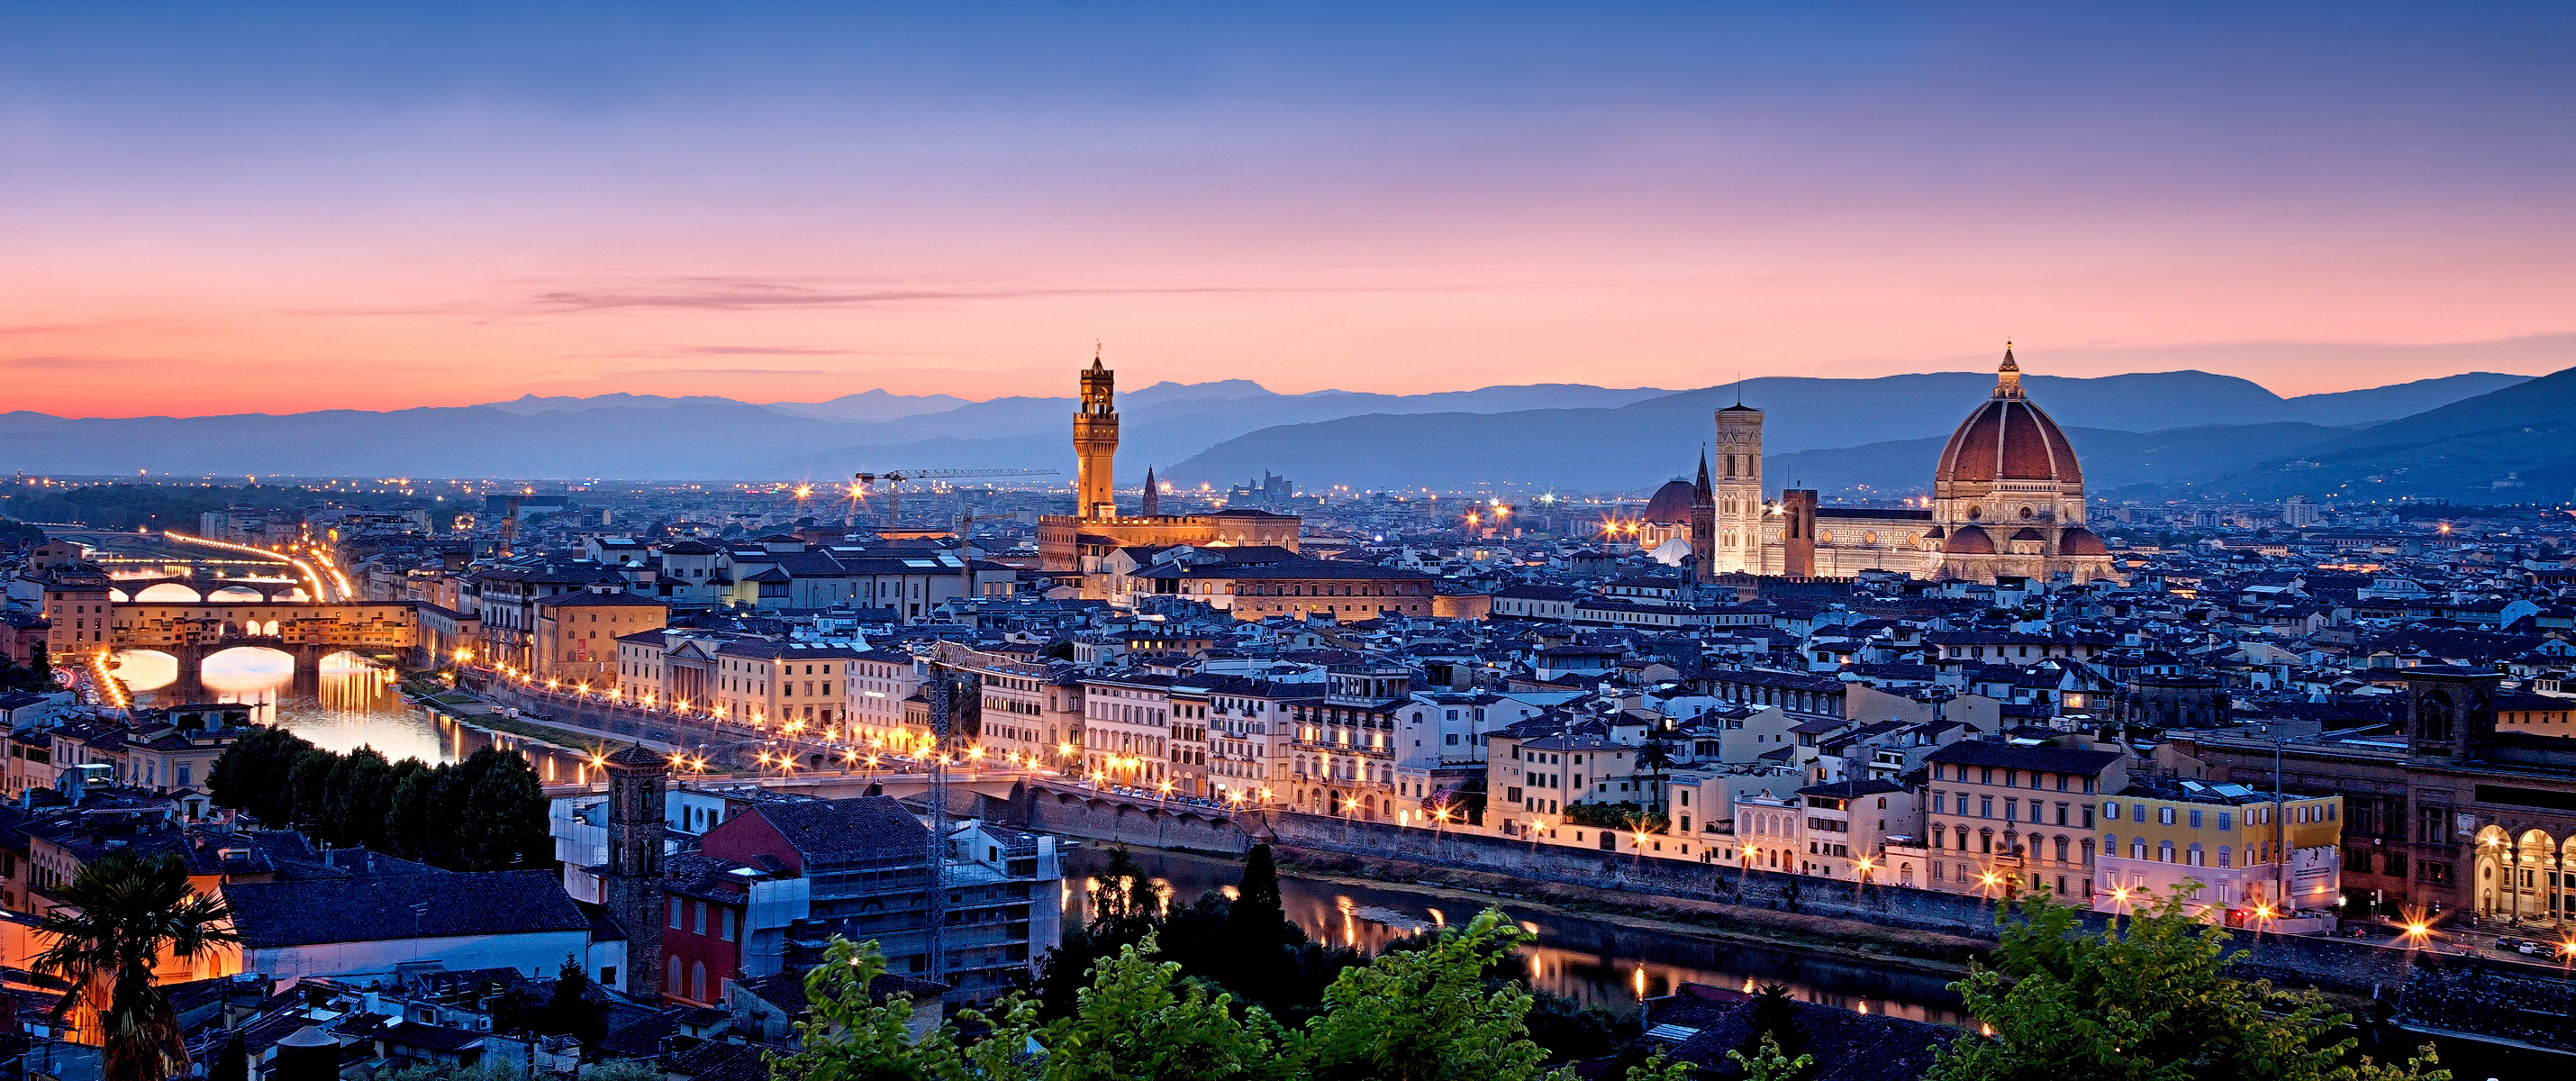 Toscana Tuscany Italy Florence Firenze Wallpaper Background